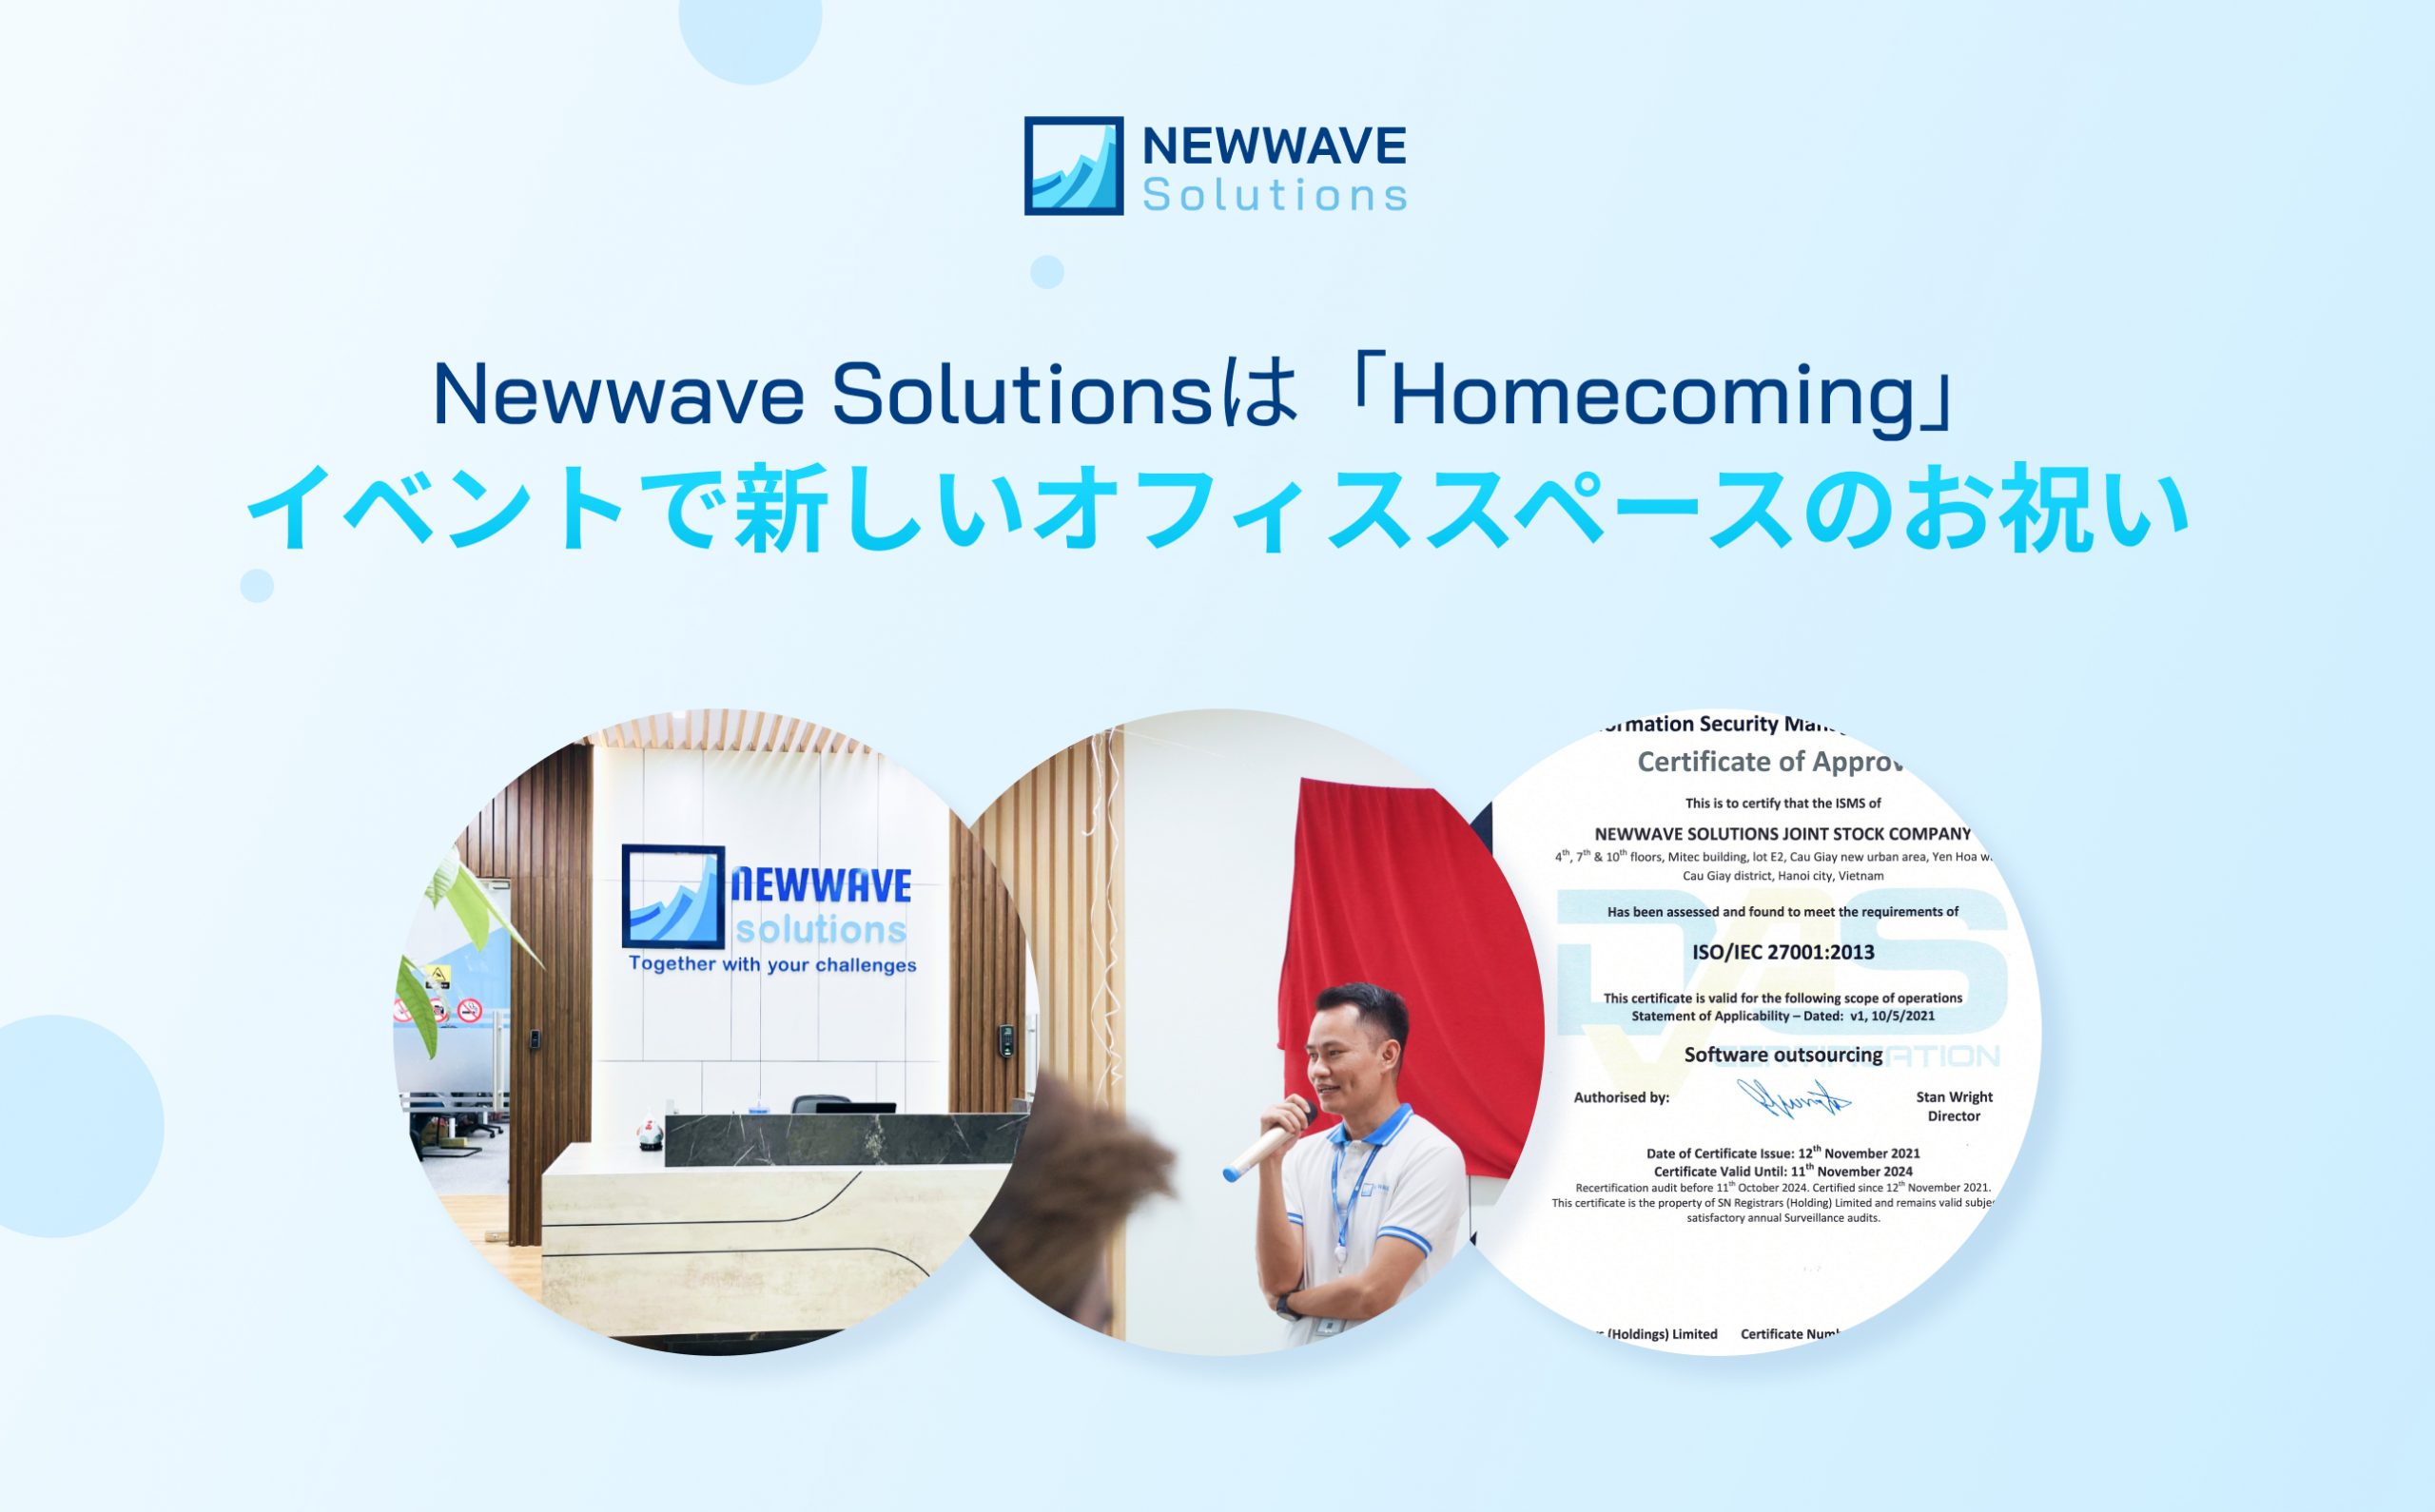 Newwave SolutionsのISO認証取得